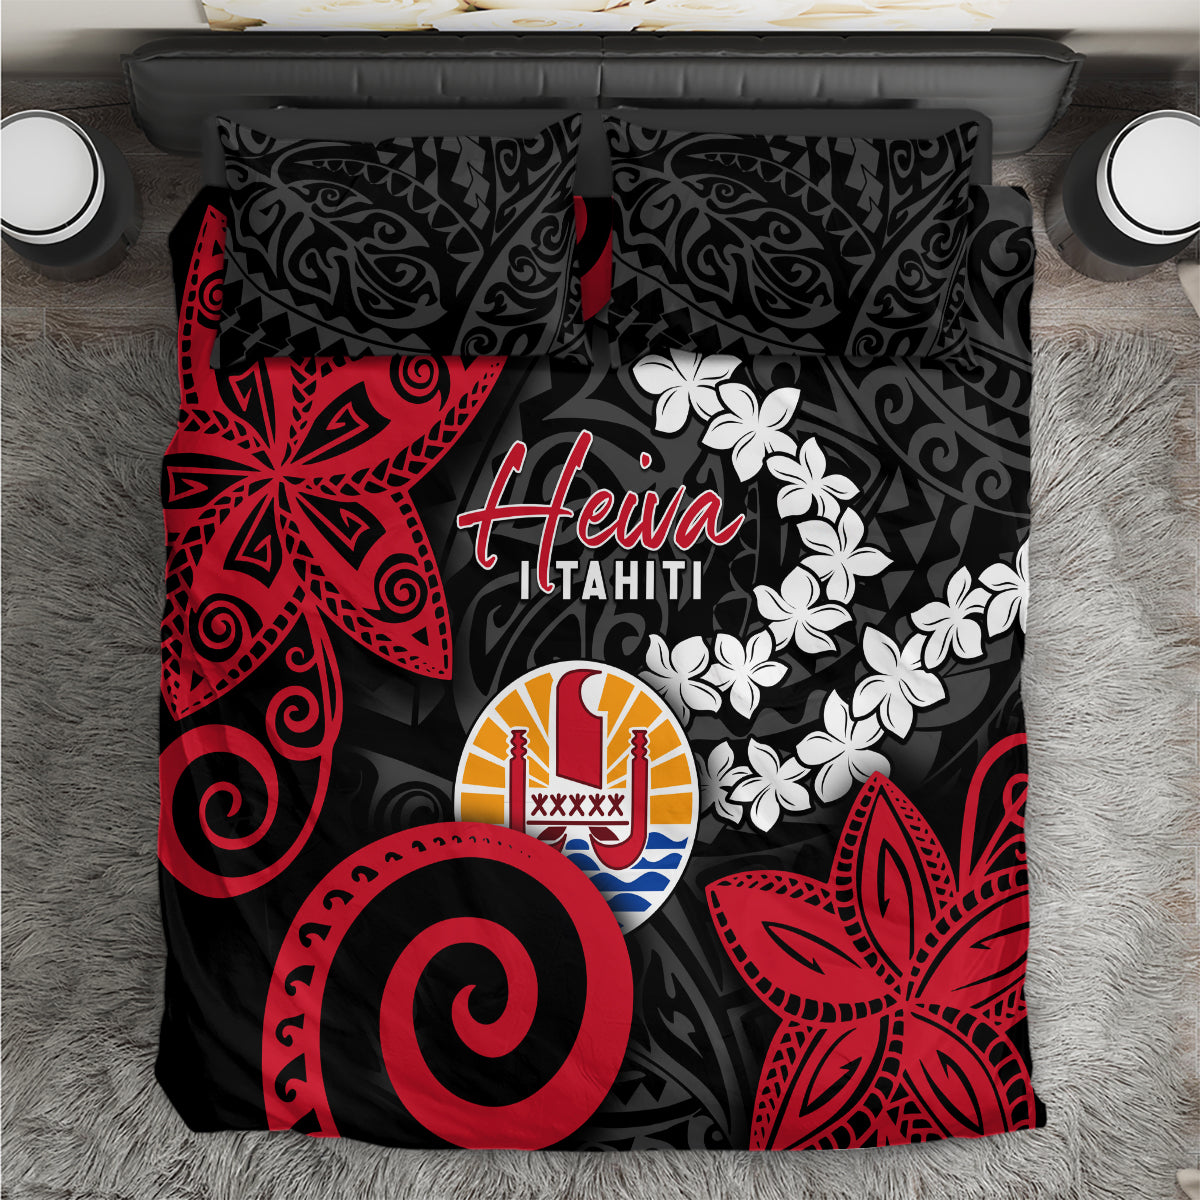 Tahiti Heiva Festival Bedding Set Floral Pattern With Coat Of Arms